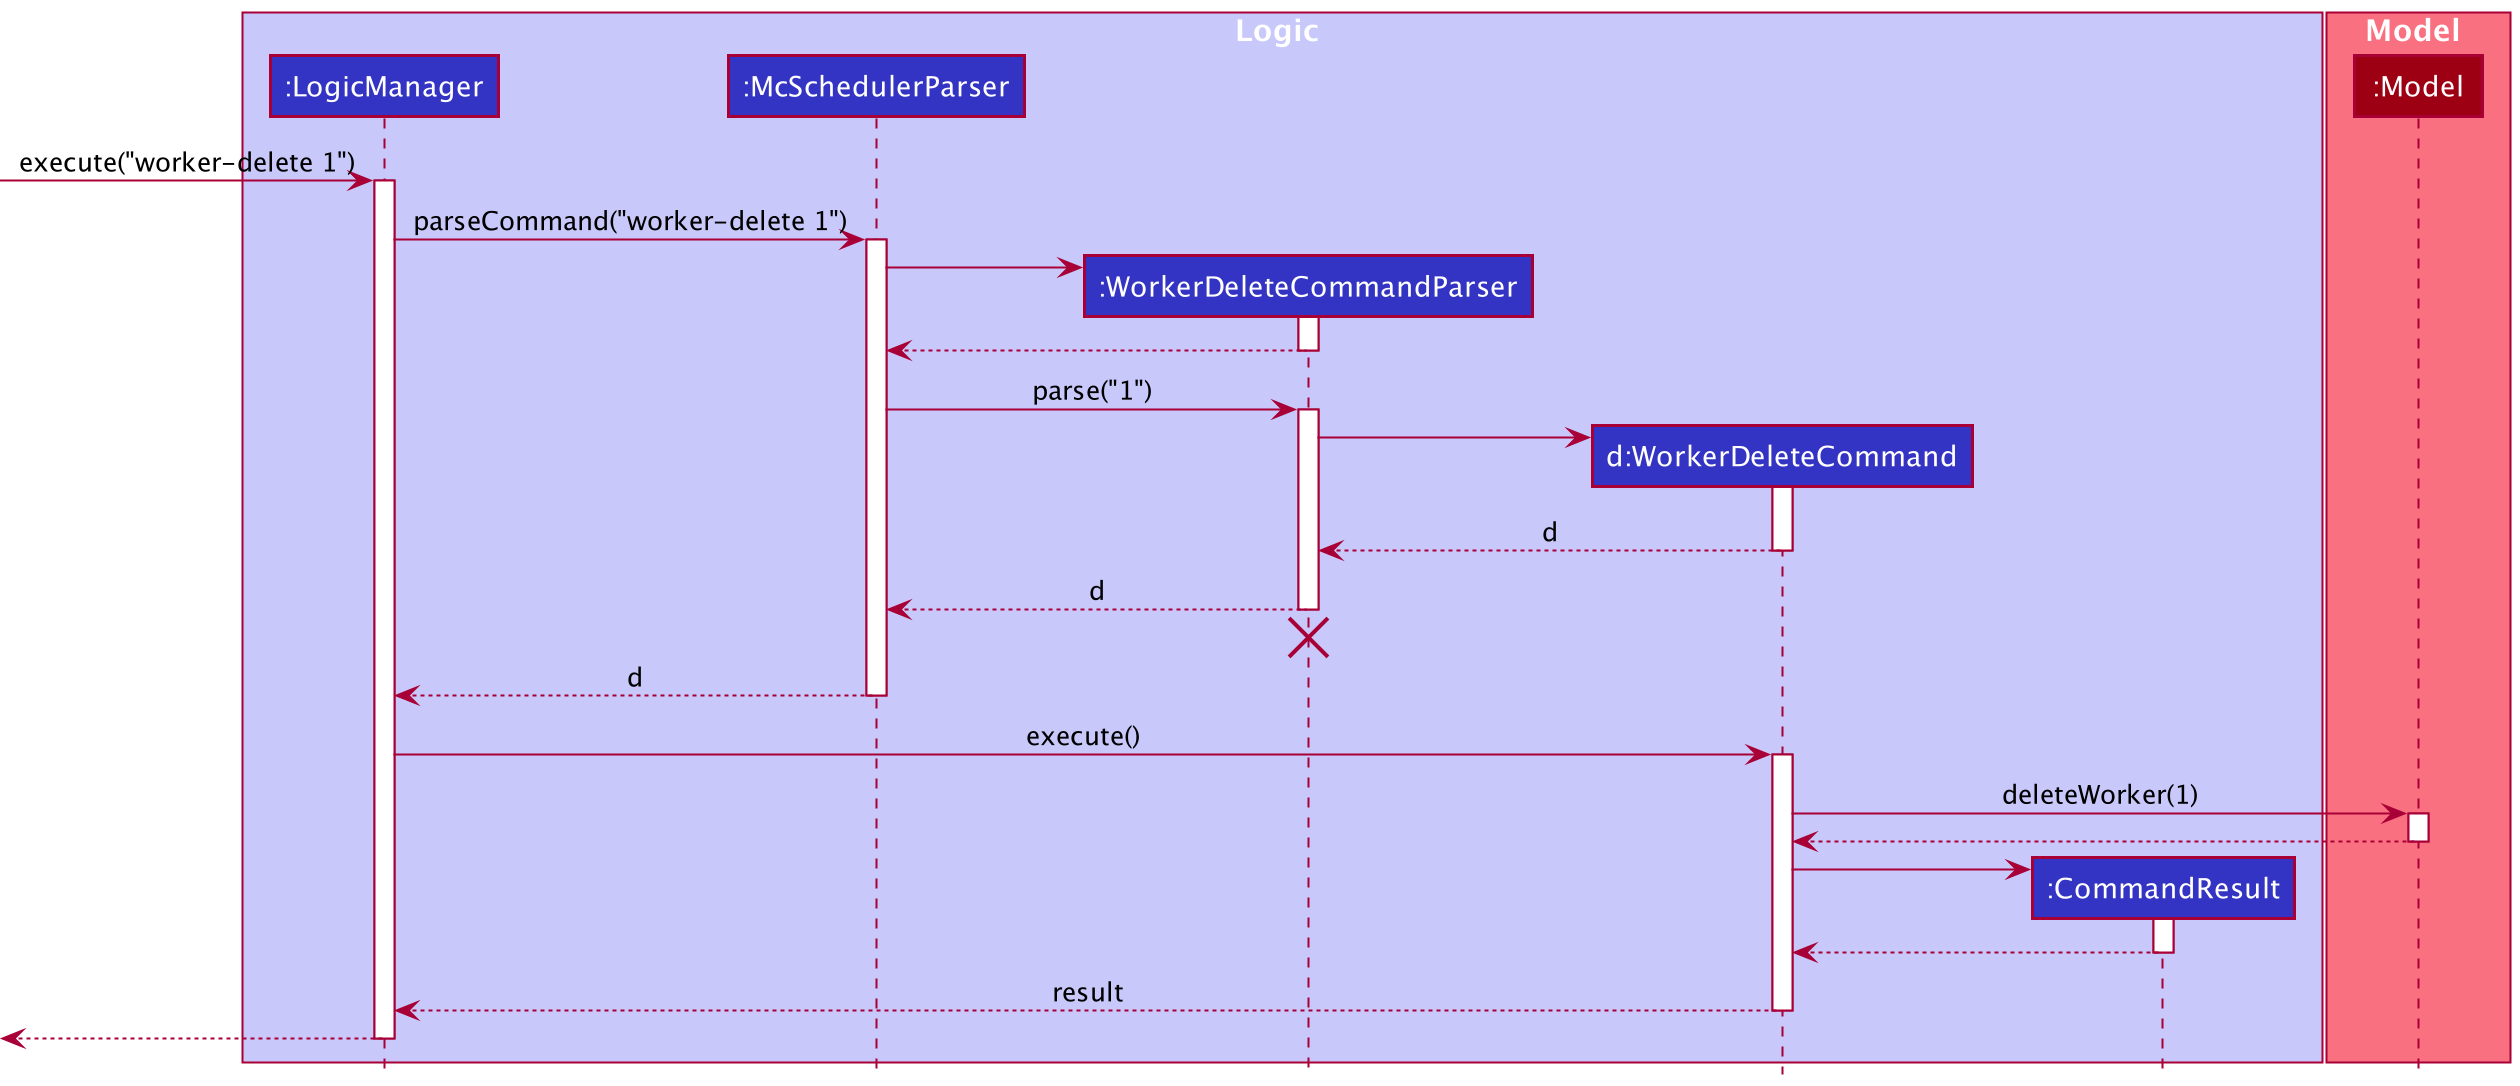 Interactions Inside the Logic Component for the `worker-delete 1` Command